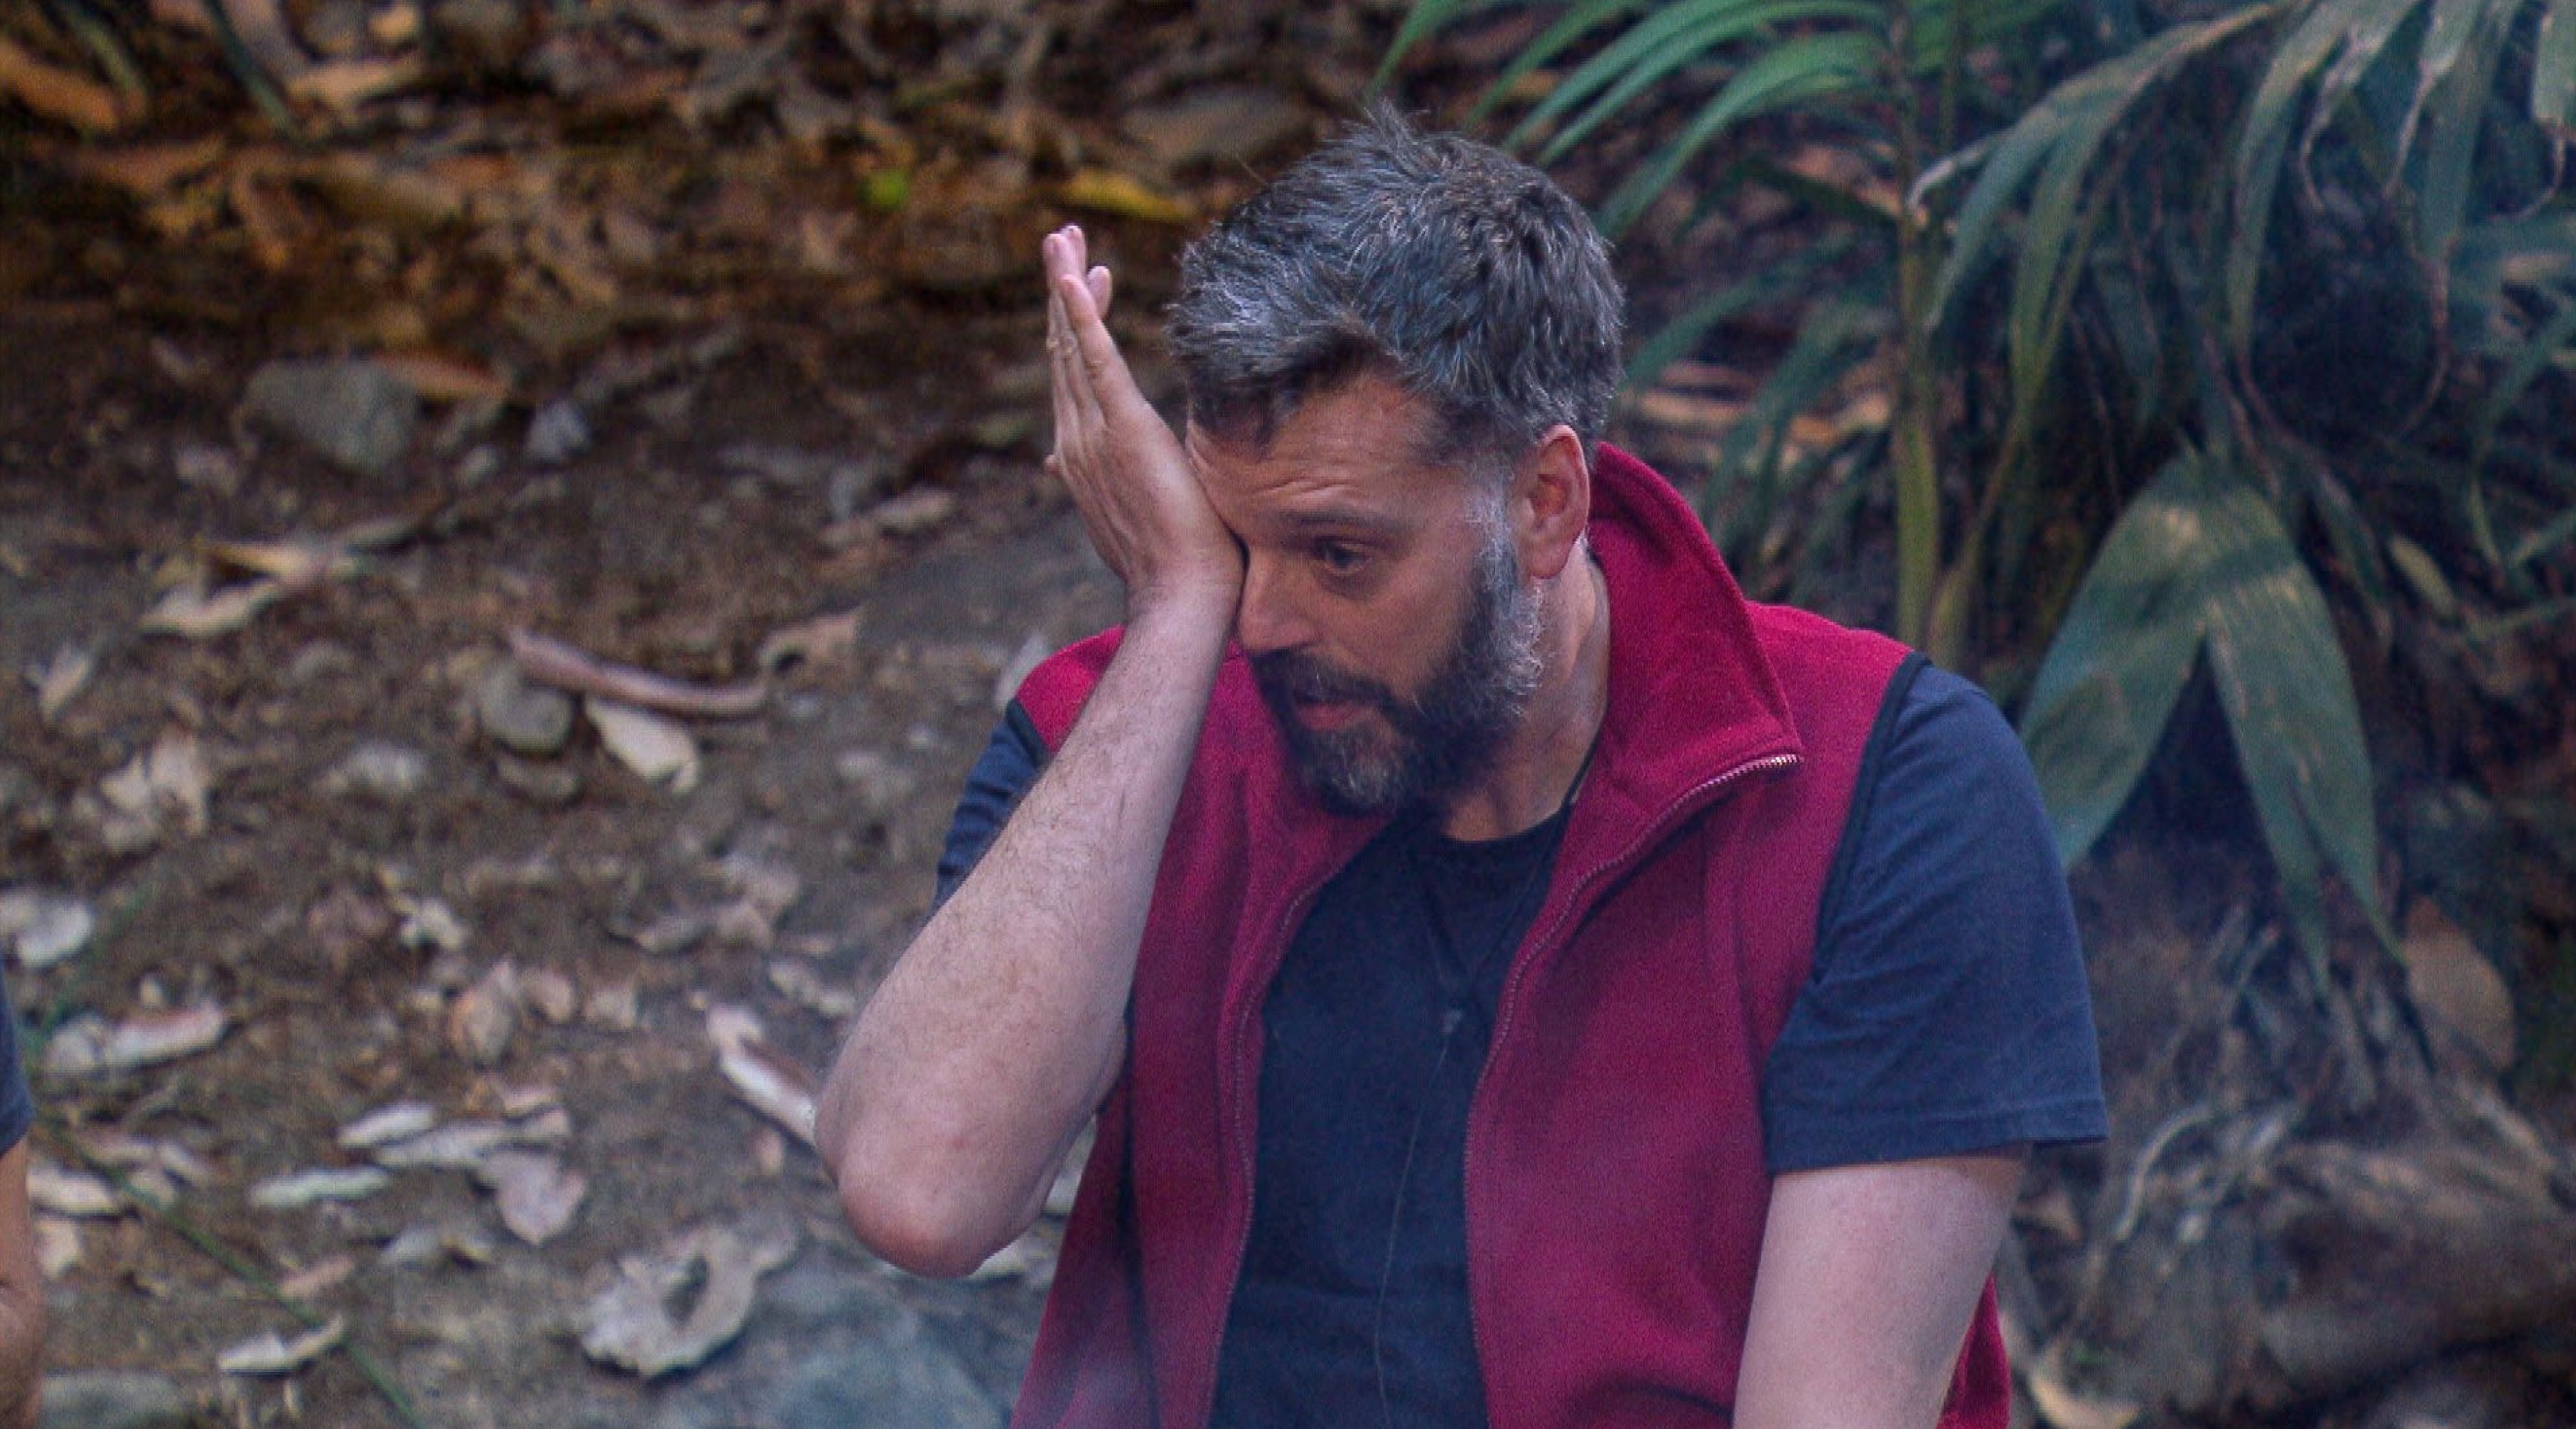 Iain in tears after his letter from home (REX/Shutterstock)Mandatory Credit: Photo by REX/Shutterstock (9262761dg) Outback Shack and Return - Iain Lee 'I'm a Celebrity... Get Me Out of Here!' TV Show, Series 17, Australia - 06 Dec 2017